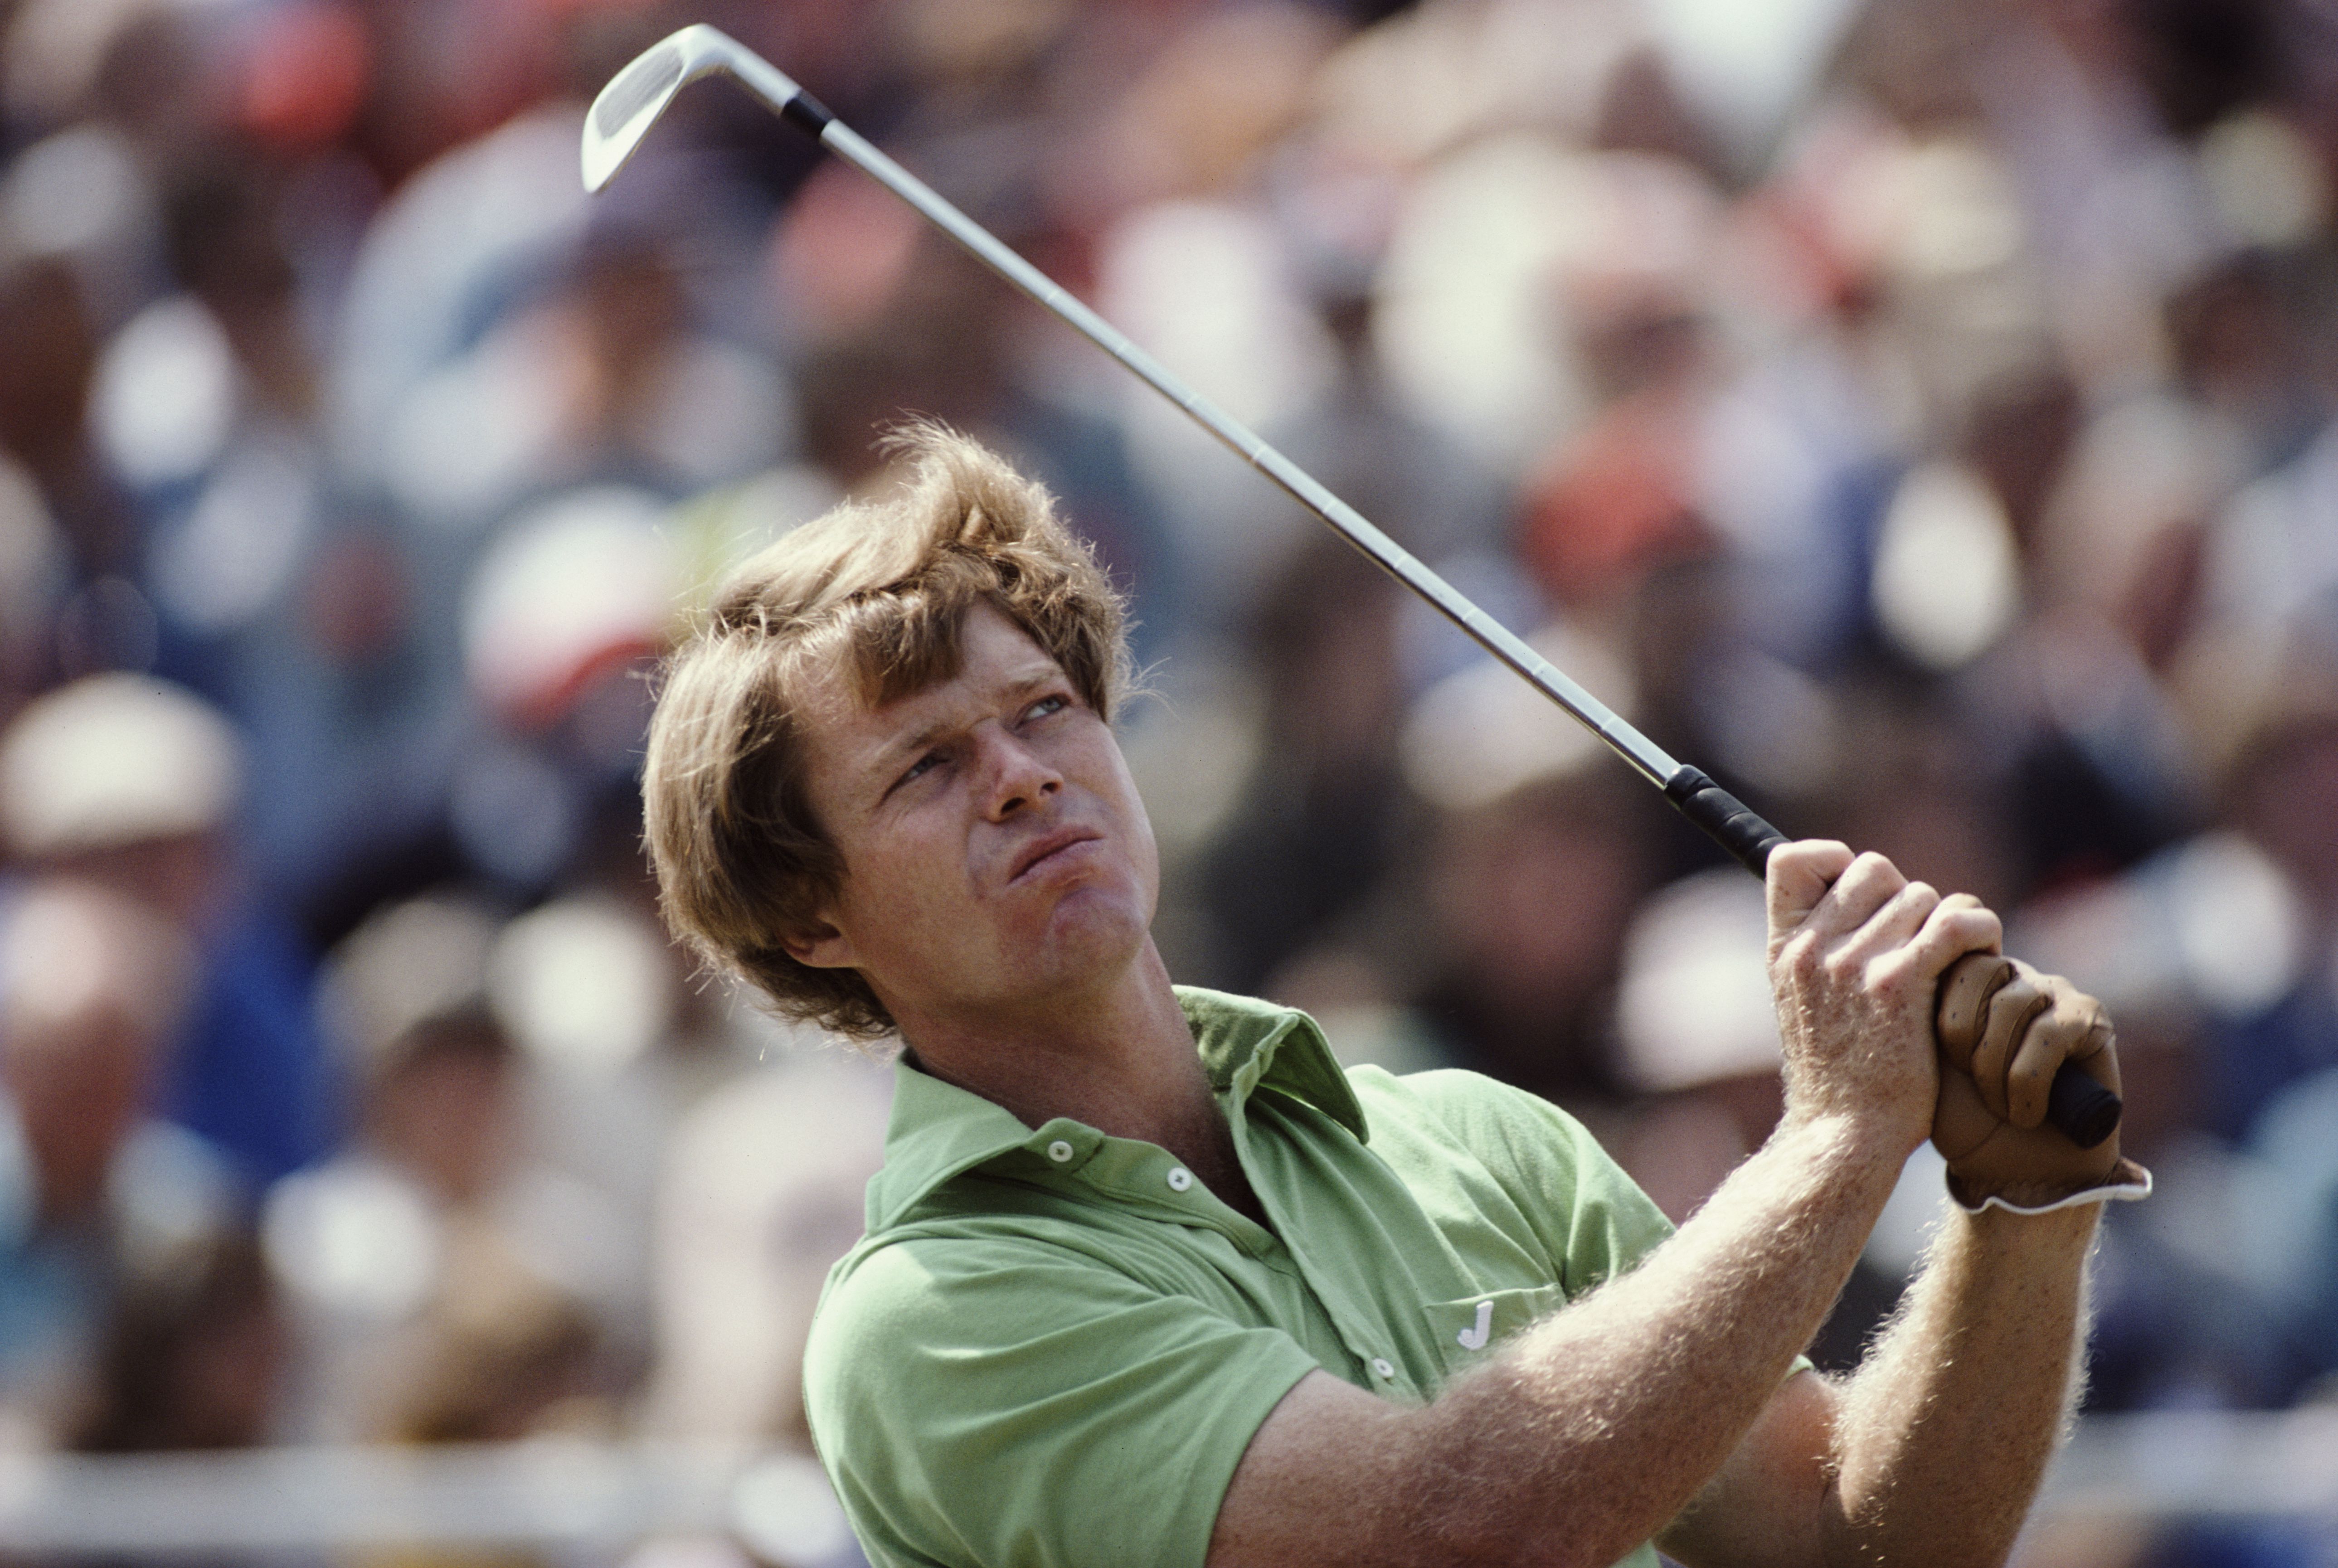 Golfer Tom Watson Biography and Career Facts